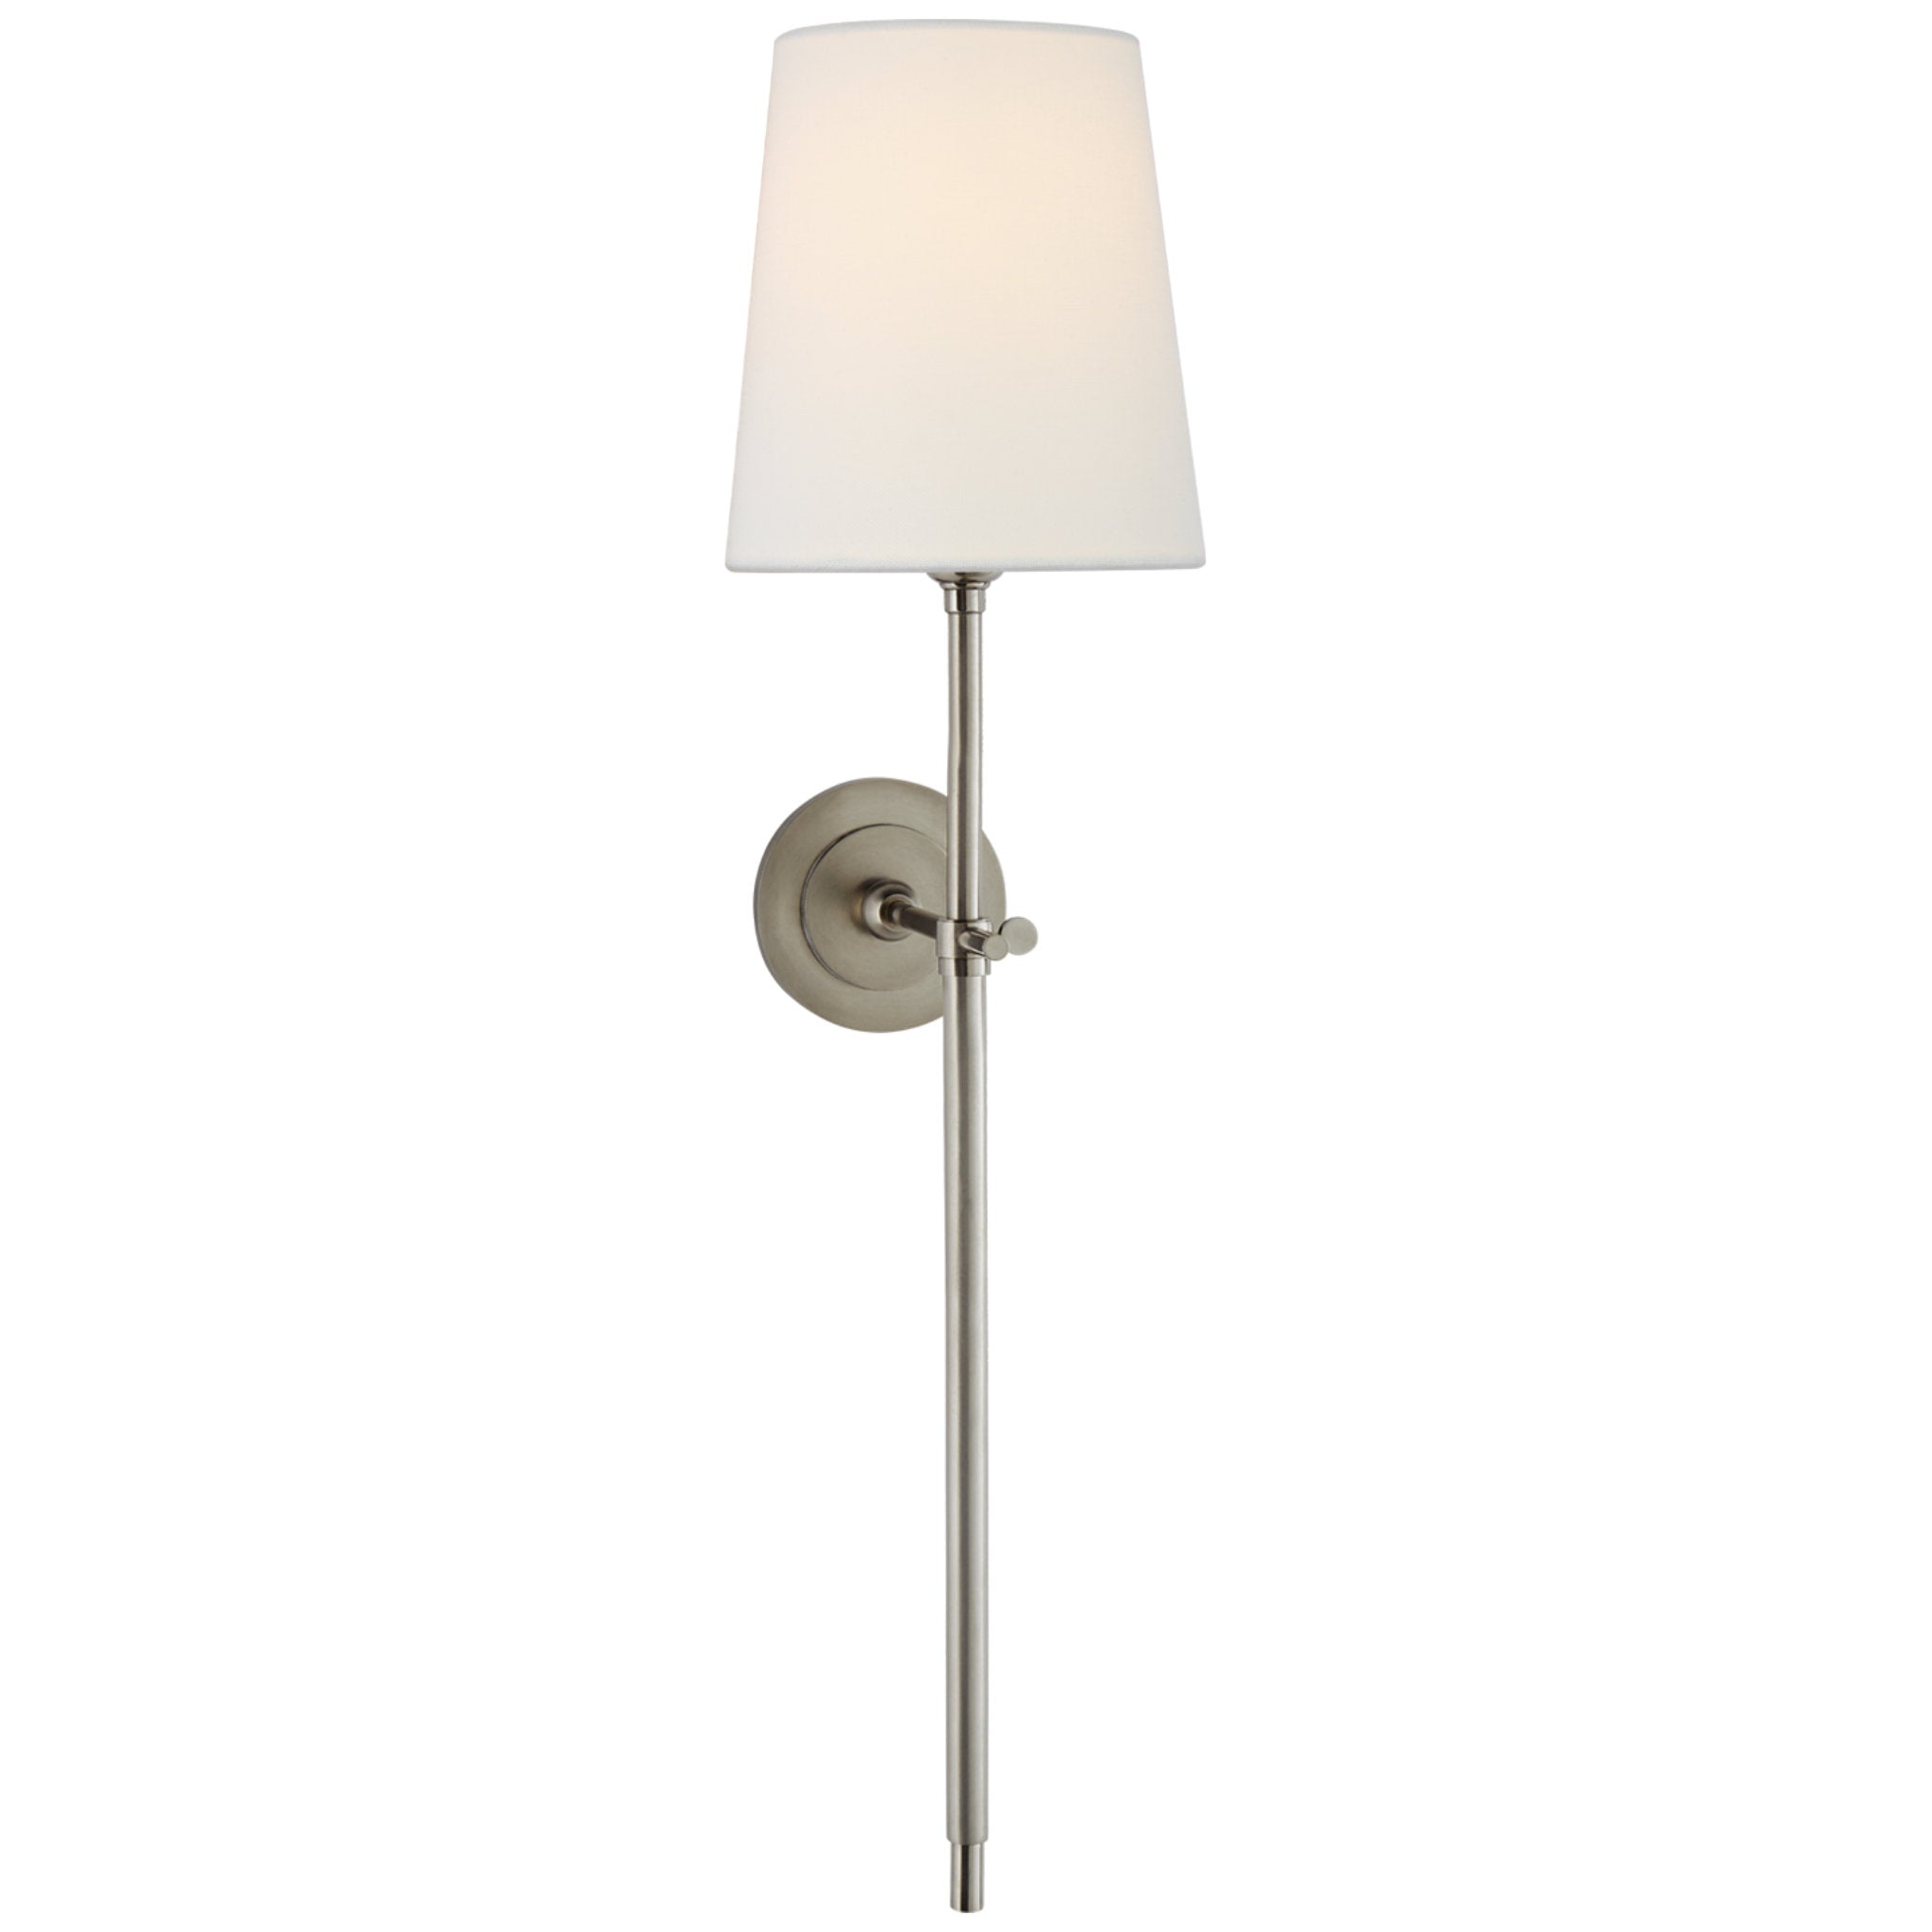 Thomas O'Brien Bryant Large Tail Sconce in Antique Nickel with Linen Shade